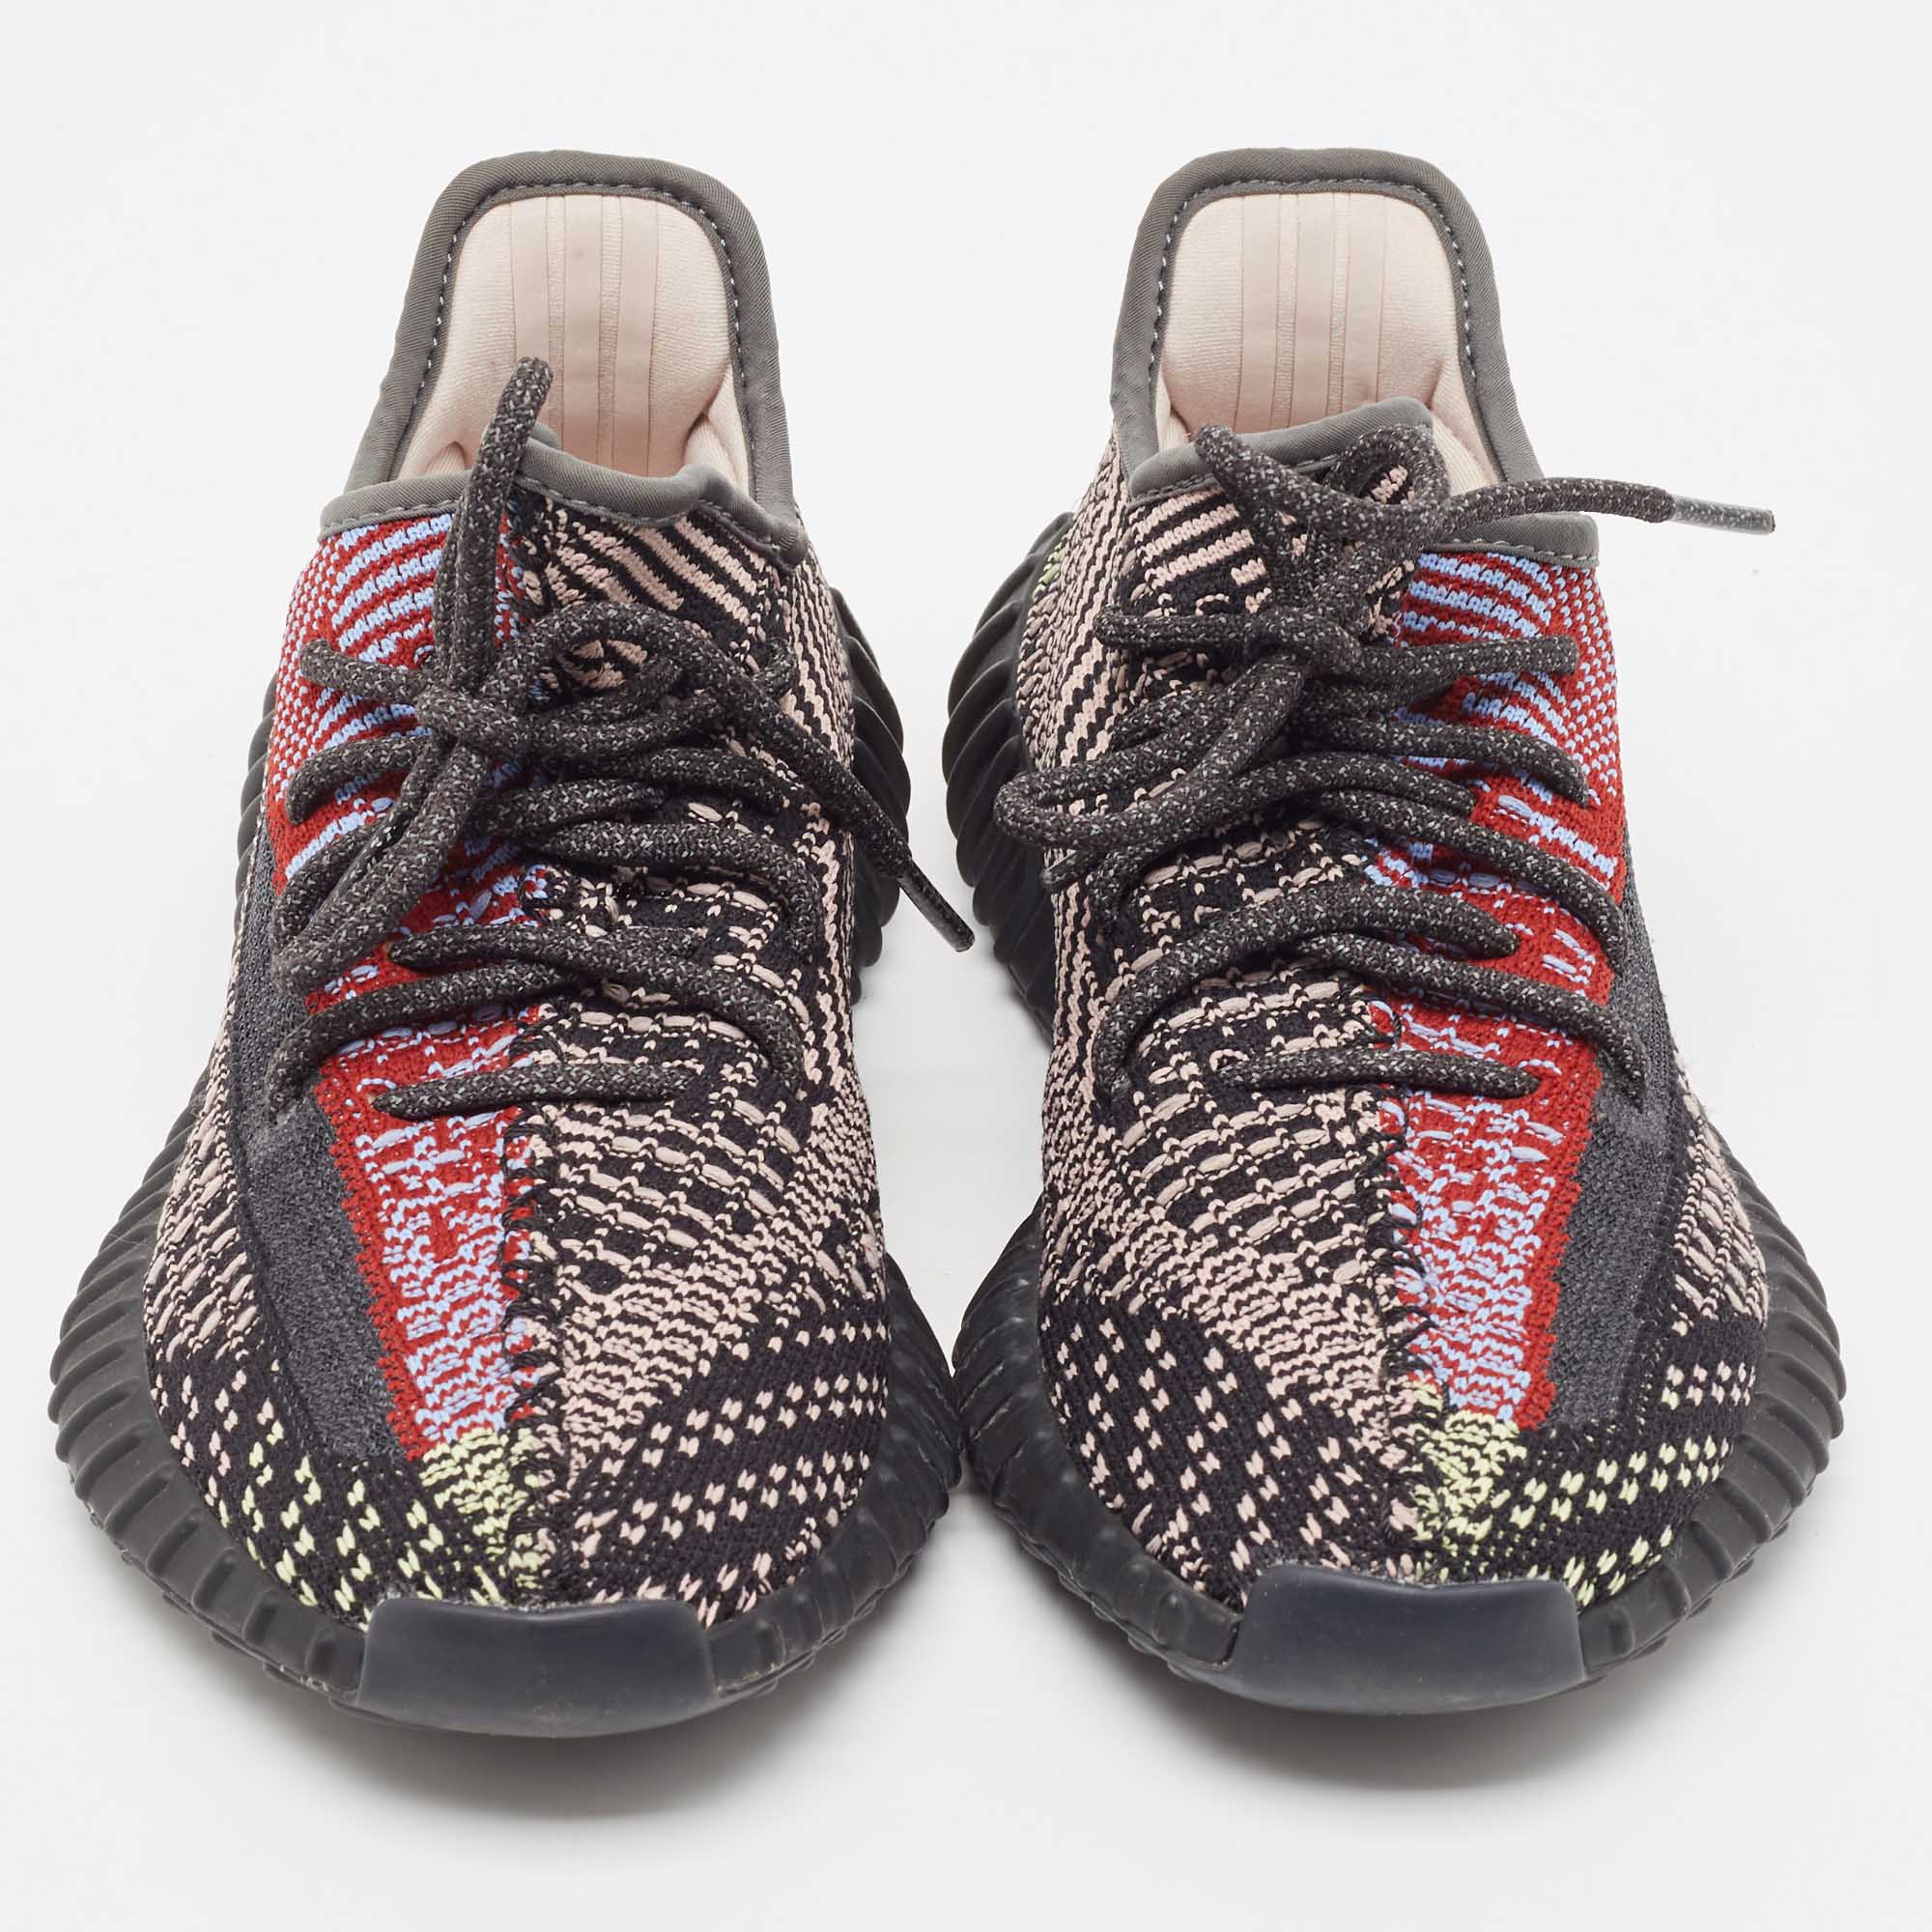 Yeezy X Adidas Multicolor Knit Fabric Boost 350 V2 Yecheil (Non-Reflective) Sneakers Size 38